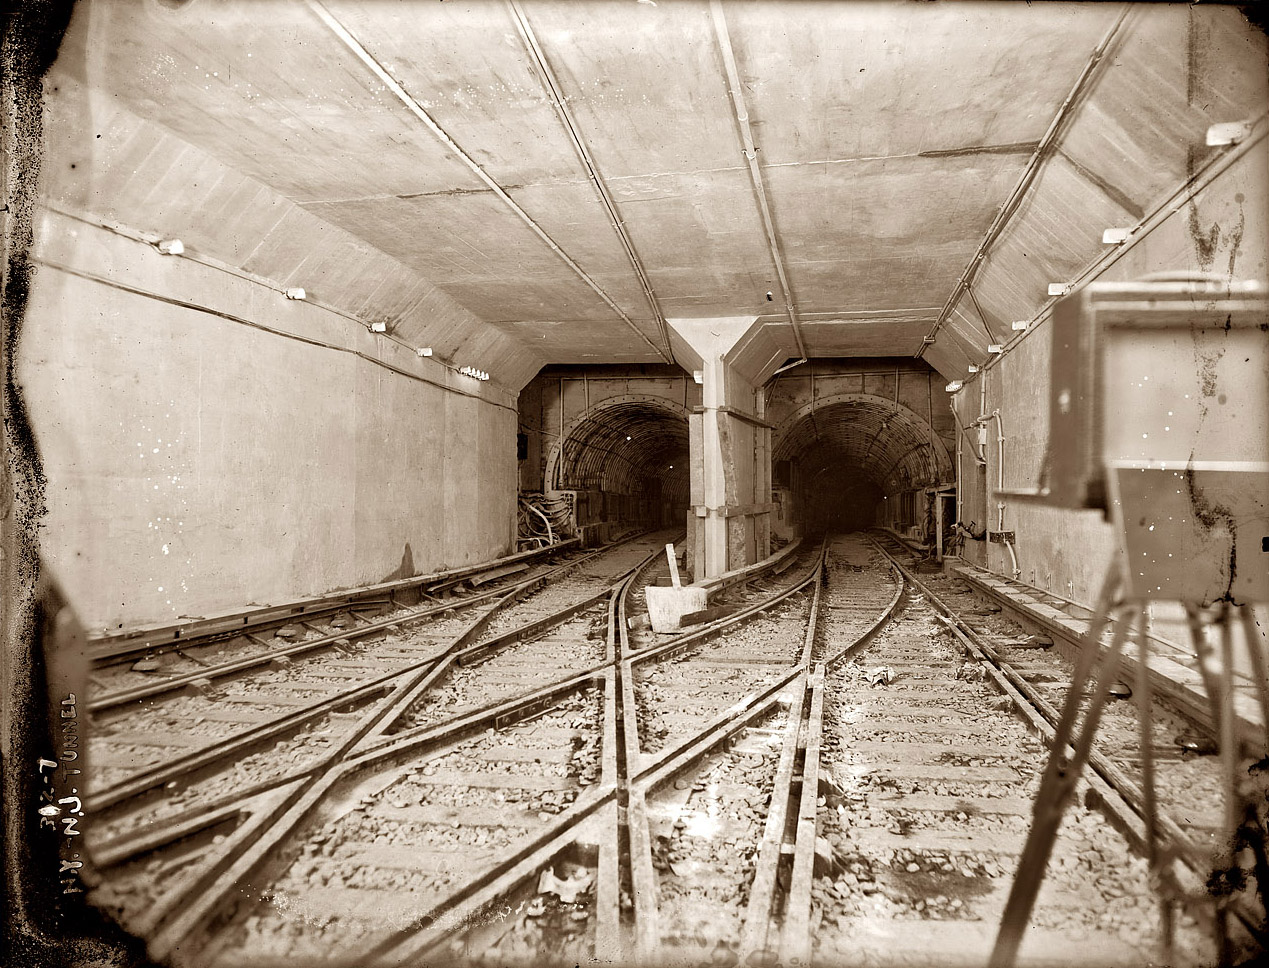 "New York - New Jersey Tunnel." One of two pairs of Hudson & Manhattan Railroad tunnels under the Hudson River sometime around their opening in 1908, after more than 30 years of off-and-on construction. A century later, the system operates the PATH trains between New Jersey and New York. View full size. 8x10 glass negative, George Grantham Bain Collection. (History of the tubes.)